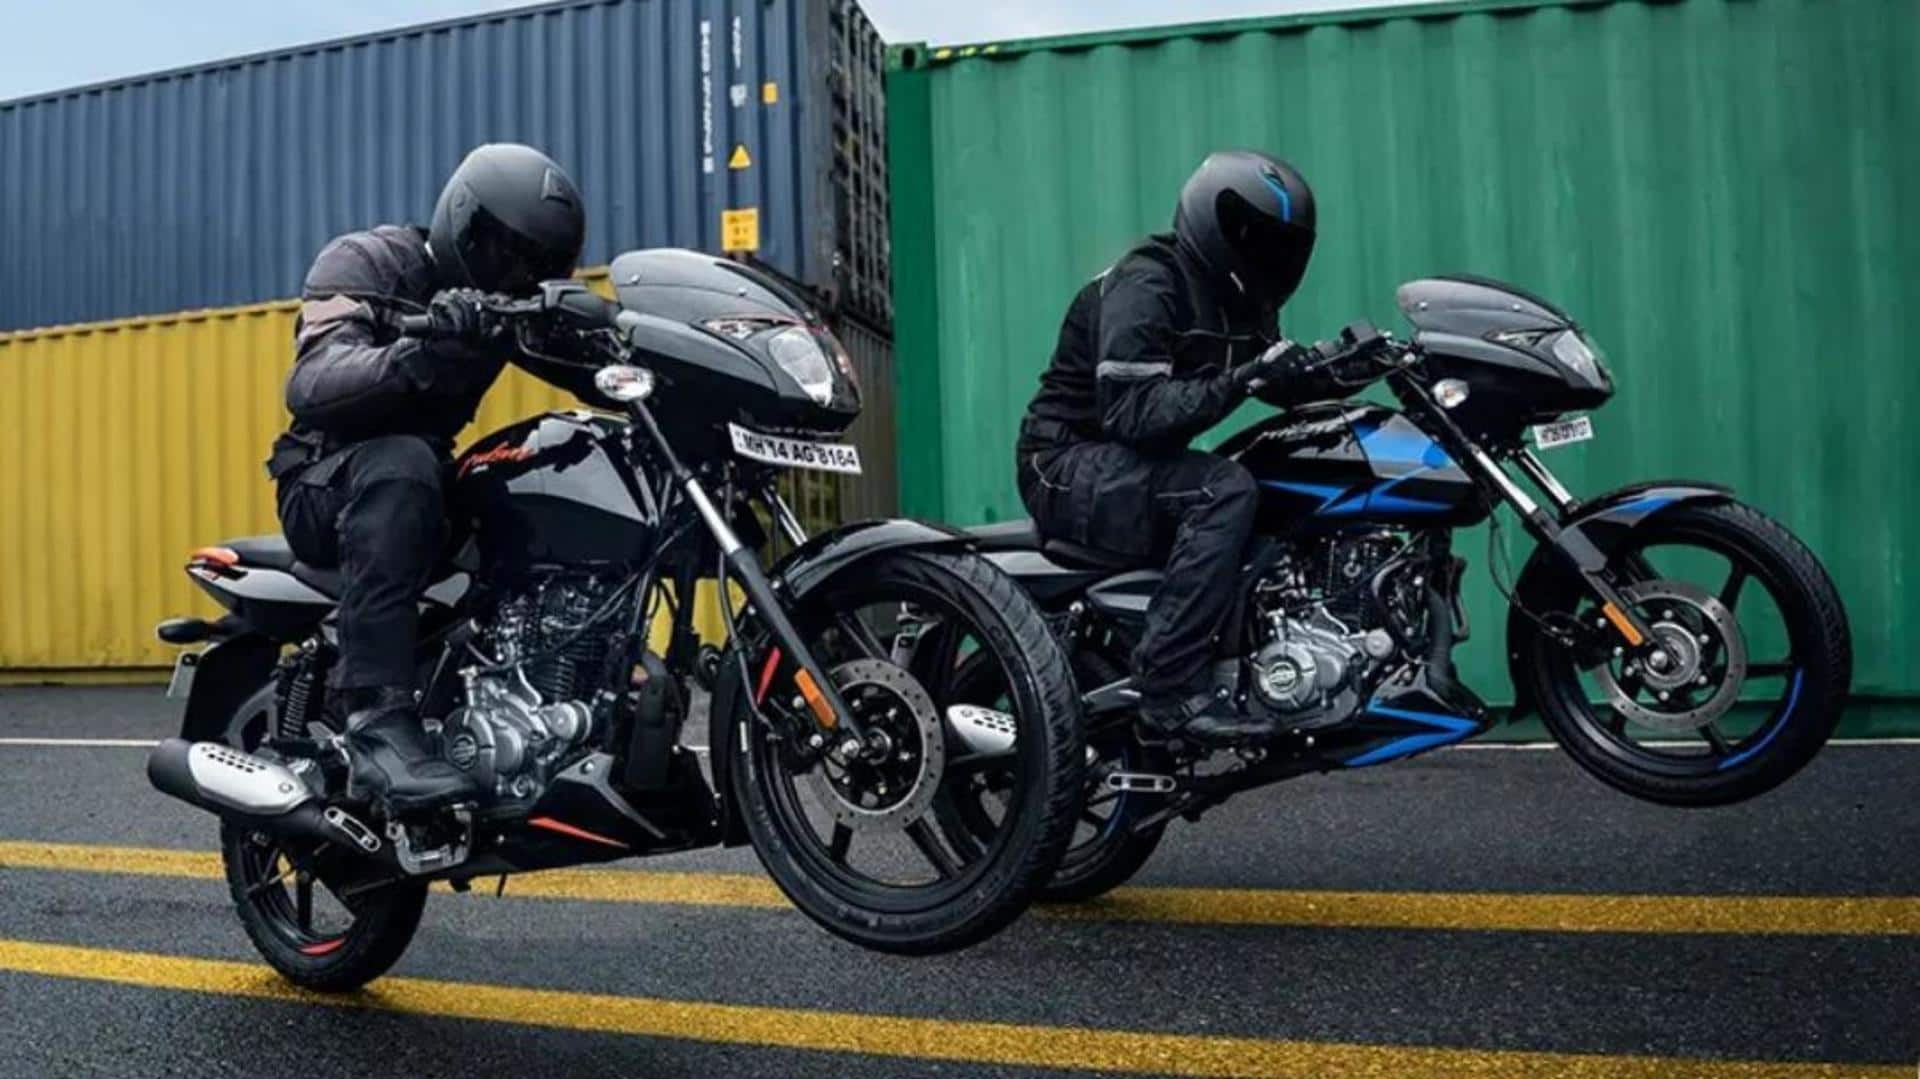 Top commuter motorcycles you can buy under Rs. 2 lakh